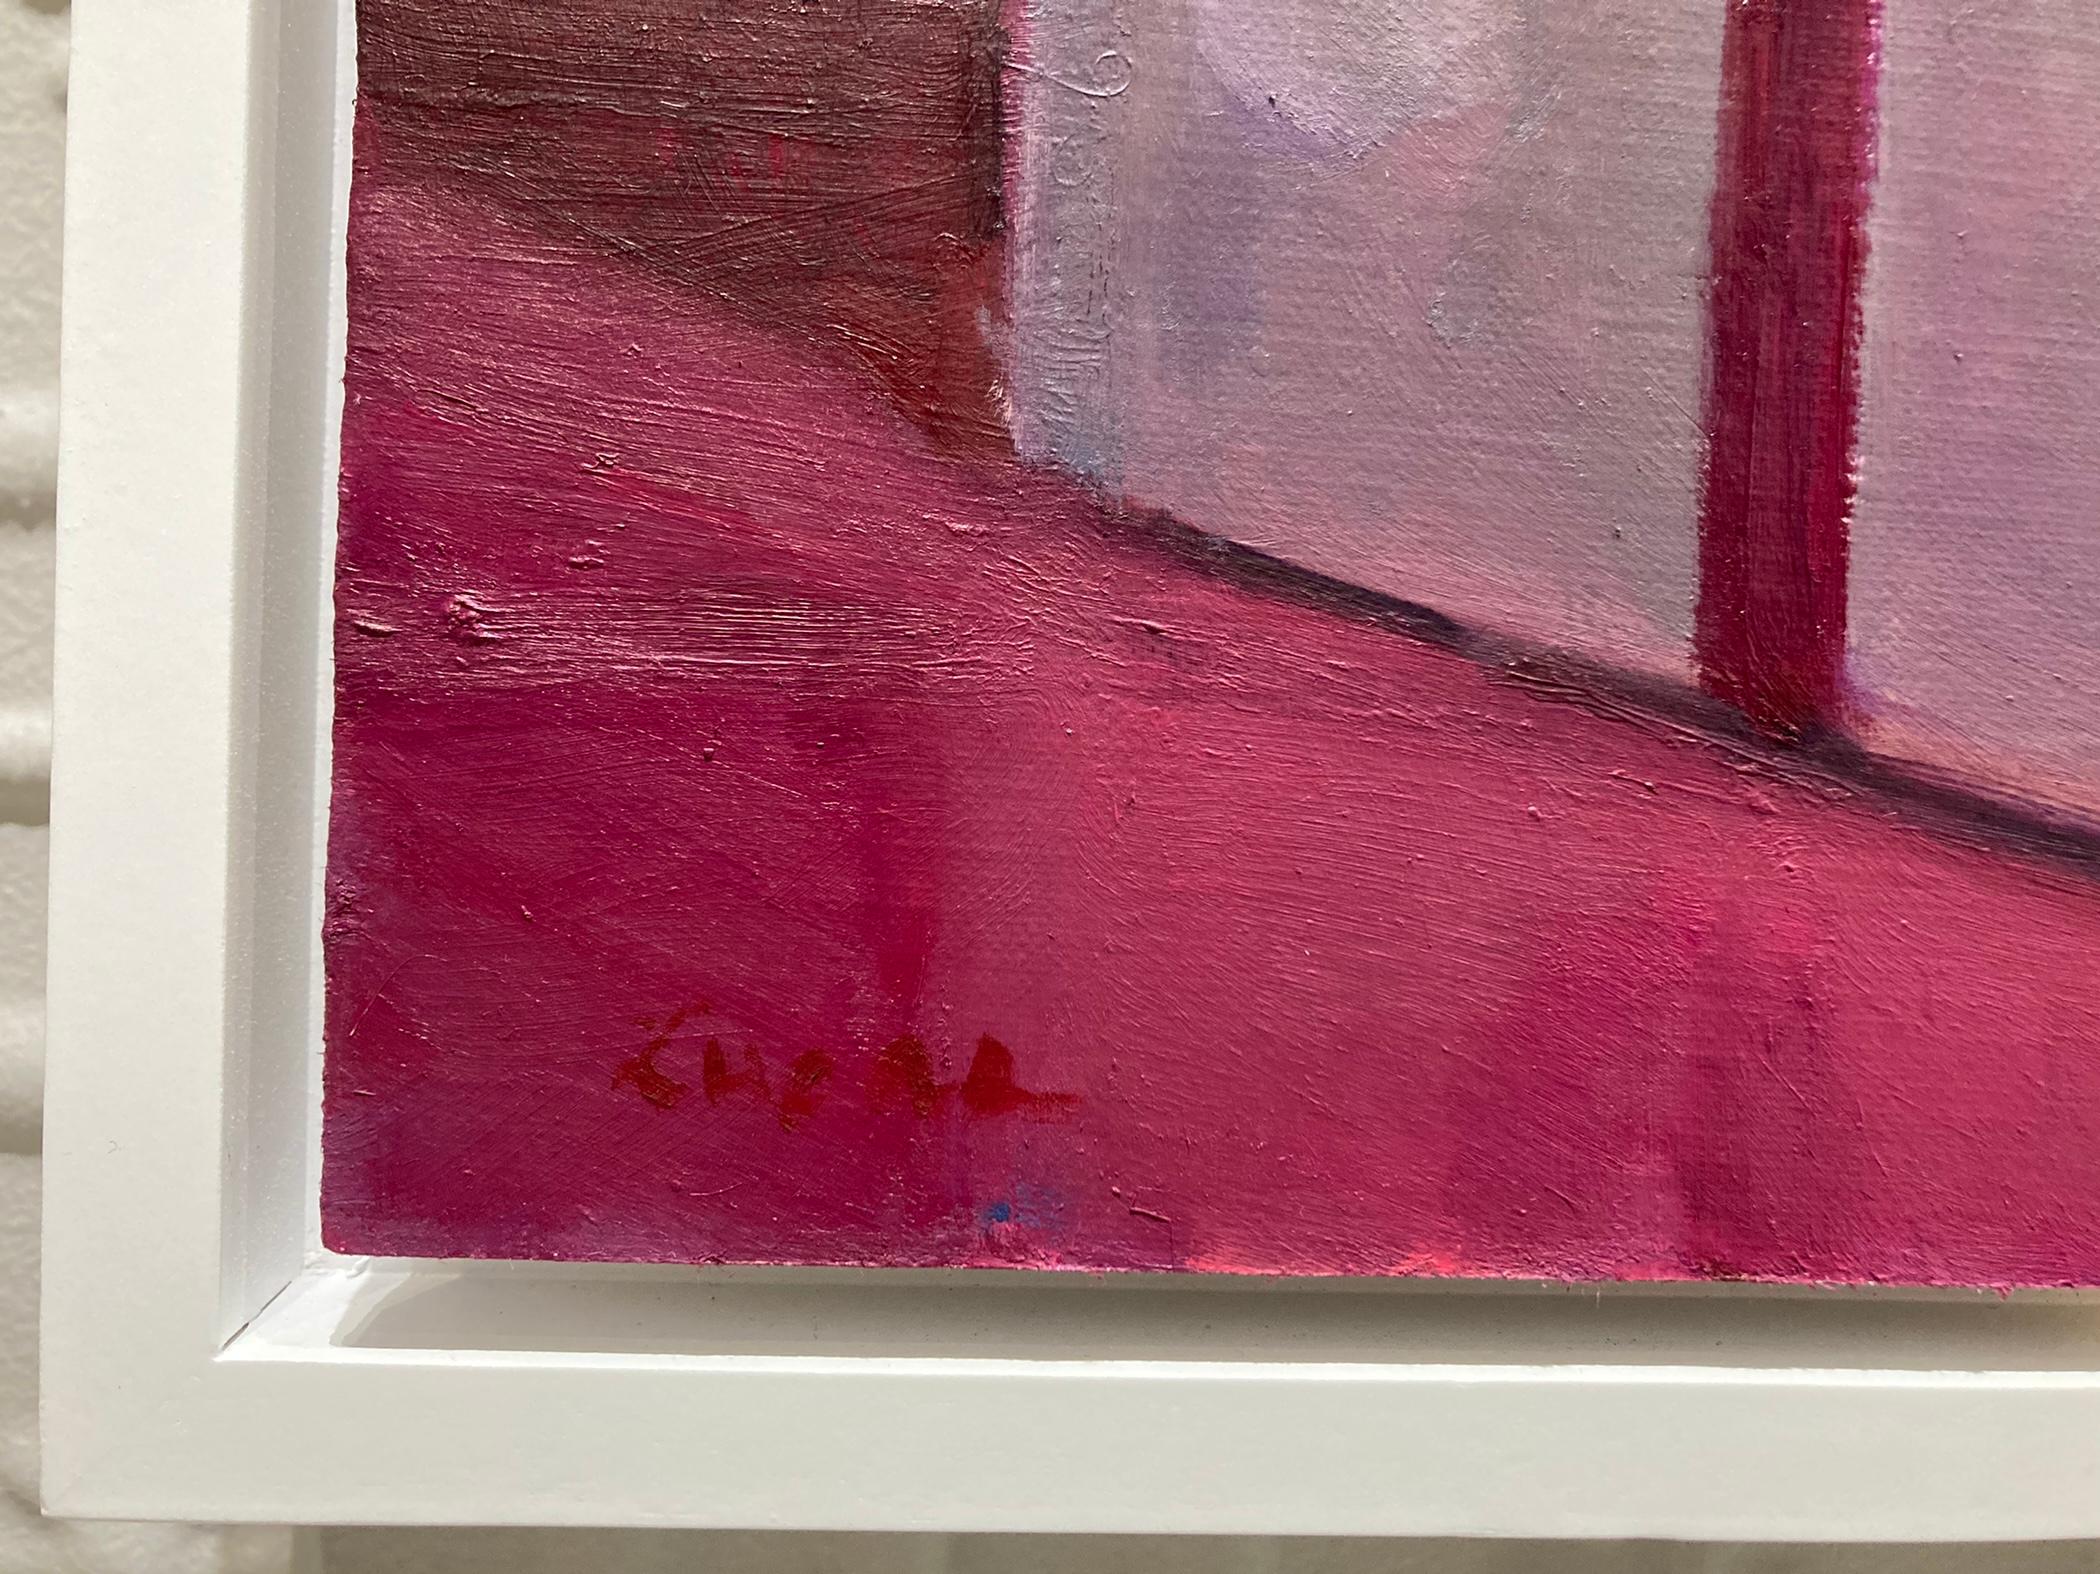 A painting of a perfectly wrapped white package against a magenta background.  Centered in the composition sits a white polka dot wrapped box, sitting with the edge directly down the middle of the canvas, and topped with a shiny magenta ribbon. The